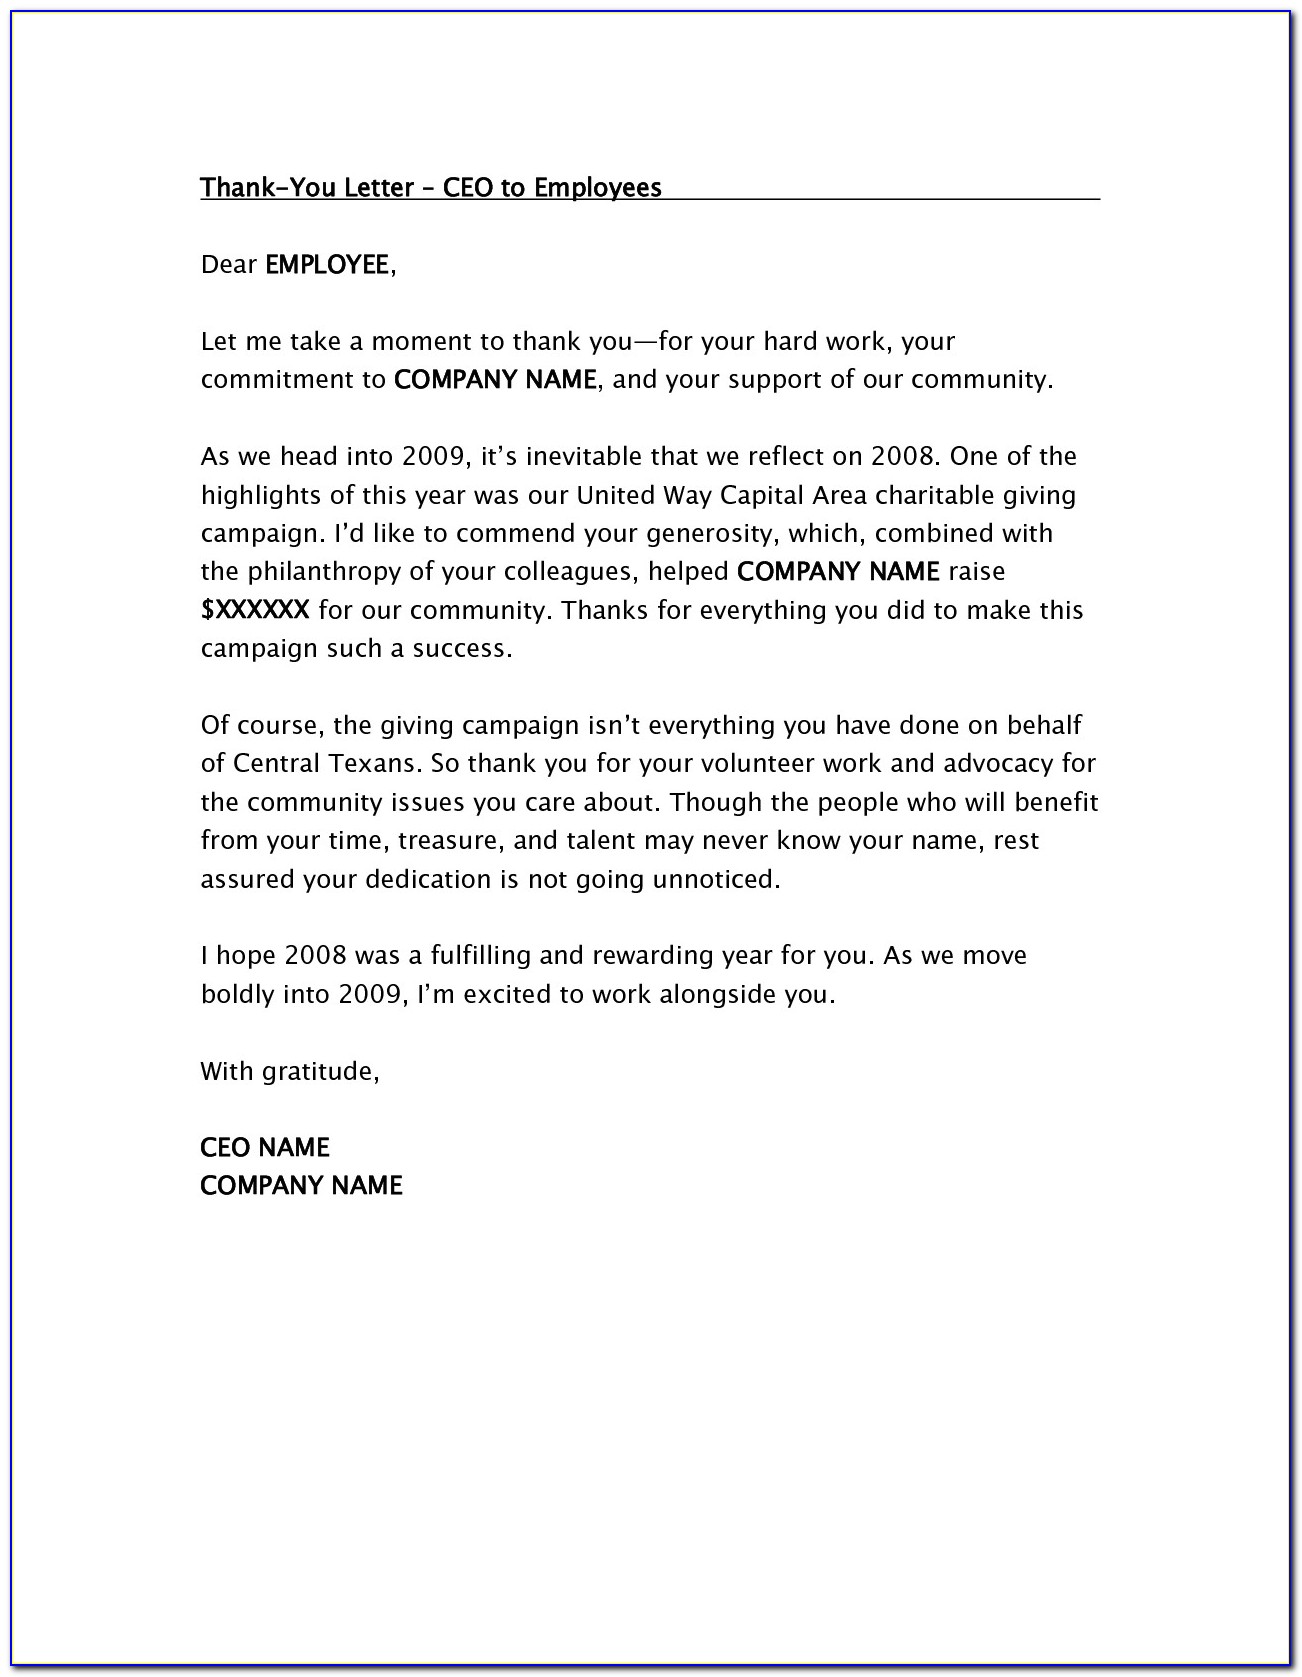 Sample Employee Anniversary Recognition Letter